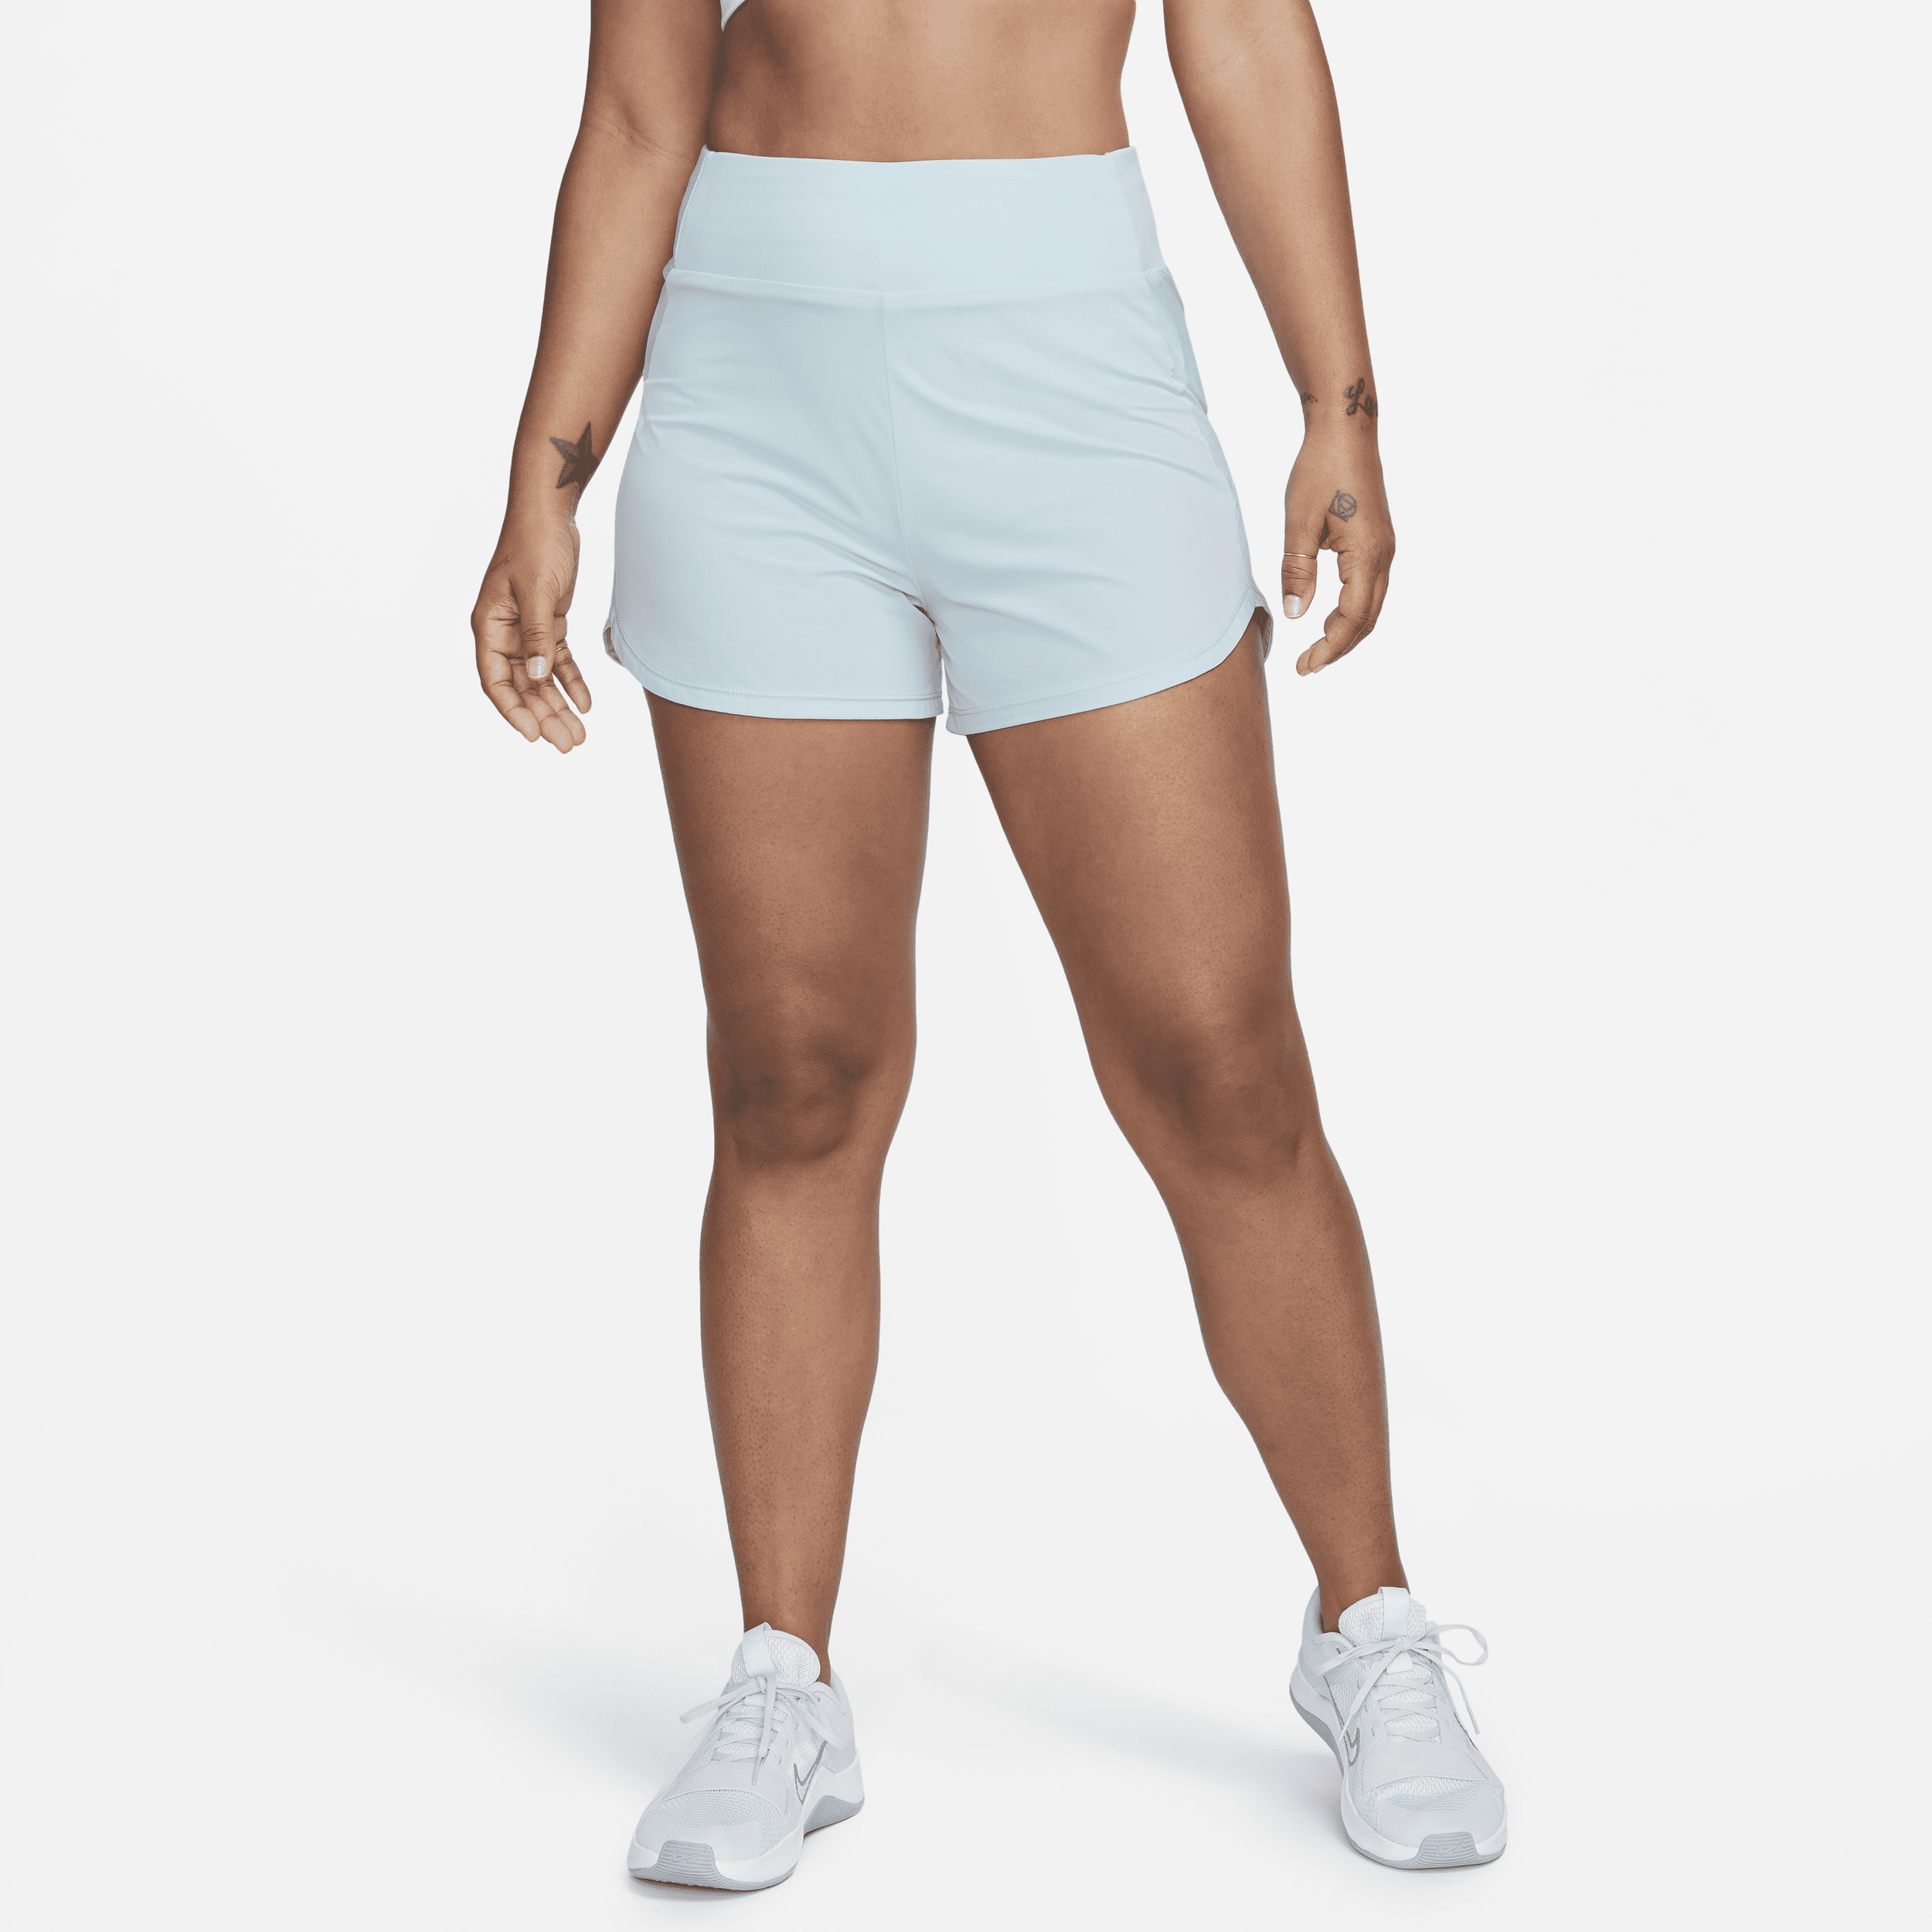 NIKE WOMEN'S BLISS DRI-FIT FITNESS HIGH-WAISTED 3" BRIEF-LINED SHORTS,1008061727